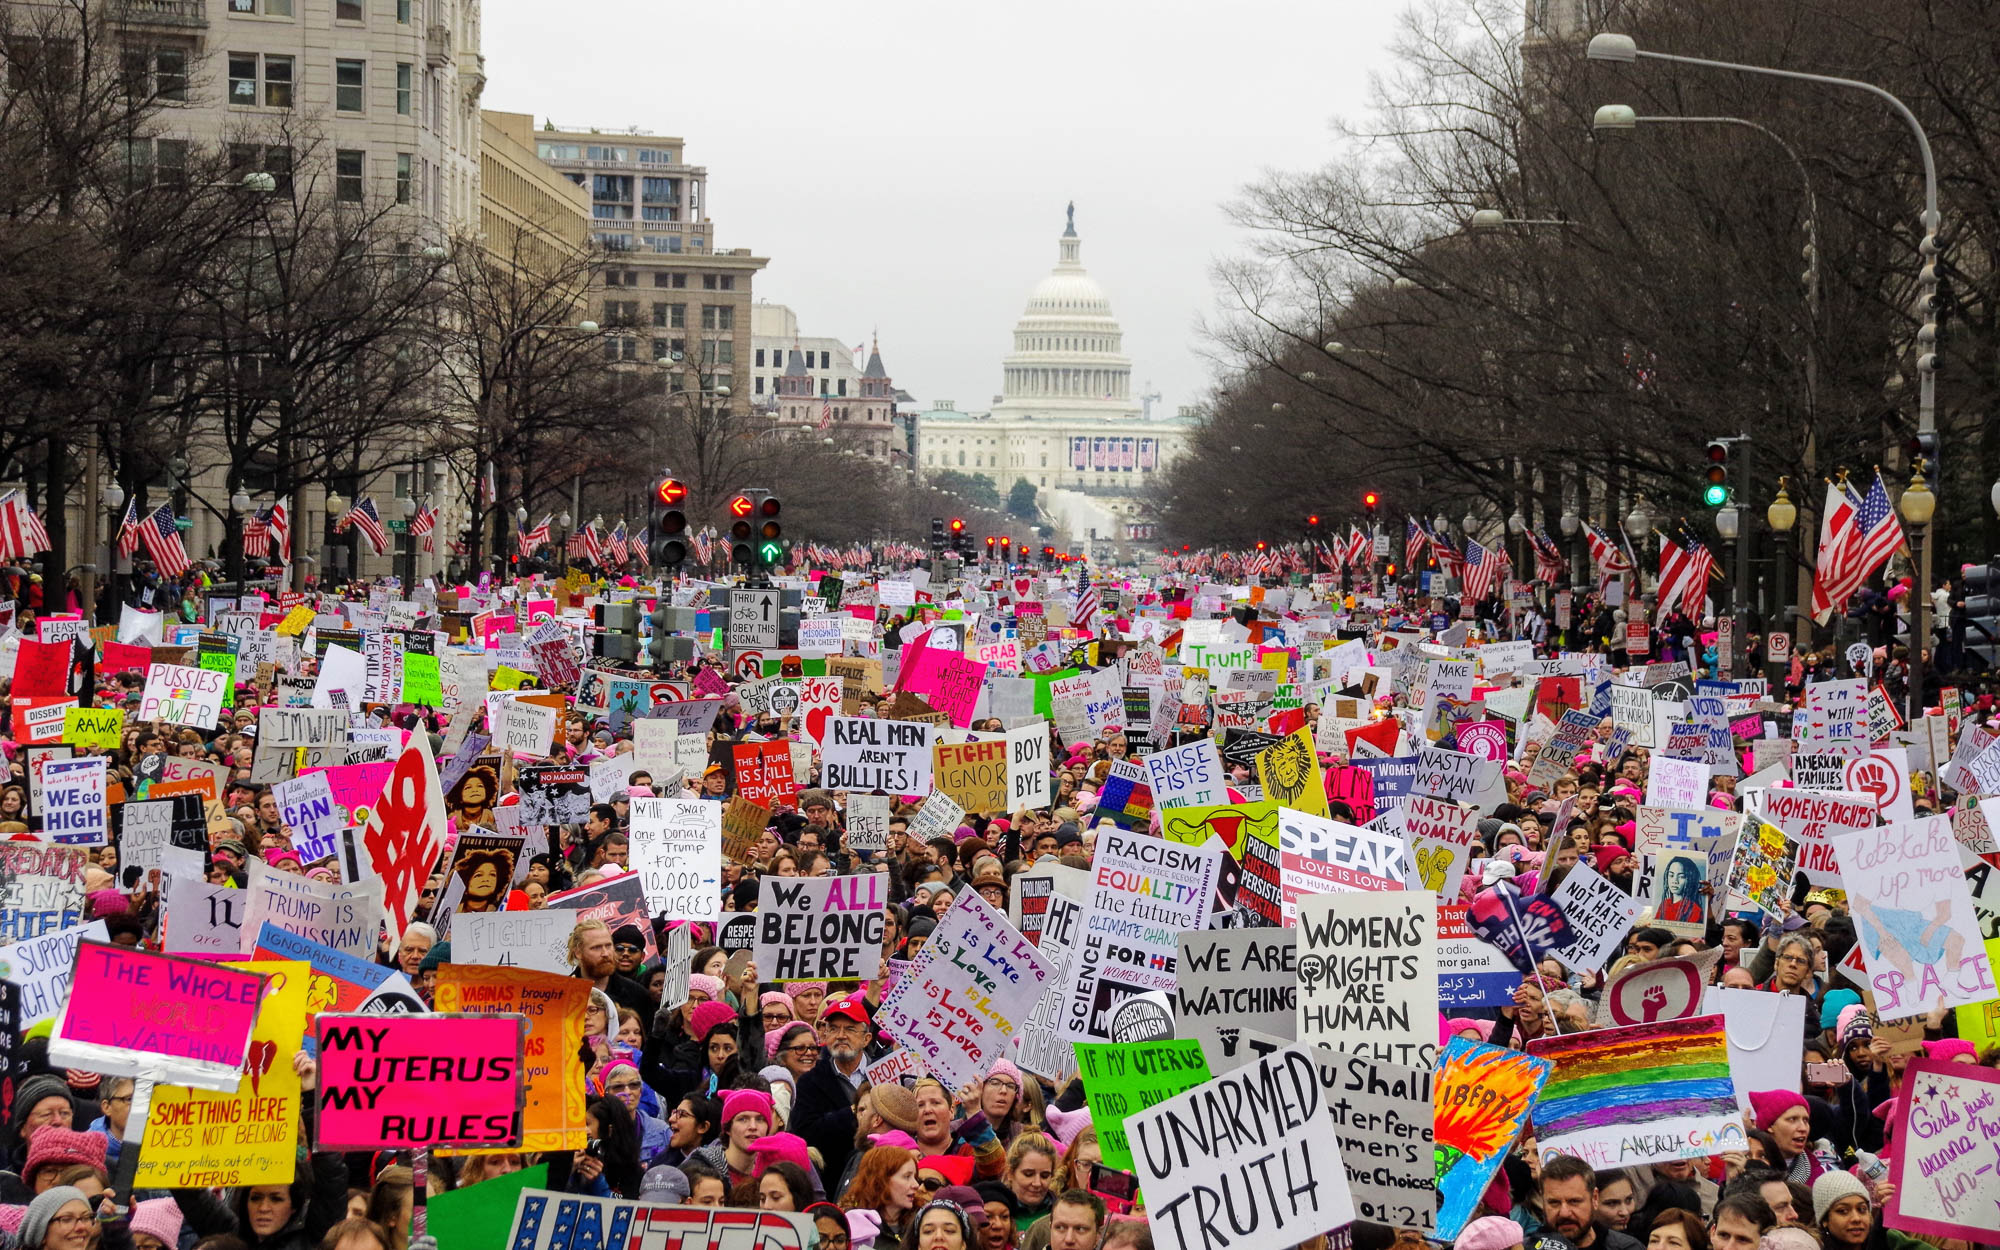 The 2017 women's march takes place in downtown Washington D.C. with the Trump Hotel and the Capitol Building in the background. Editorial credit: G. Midford / Shutterstock.com.